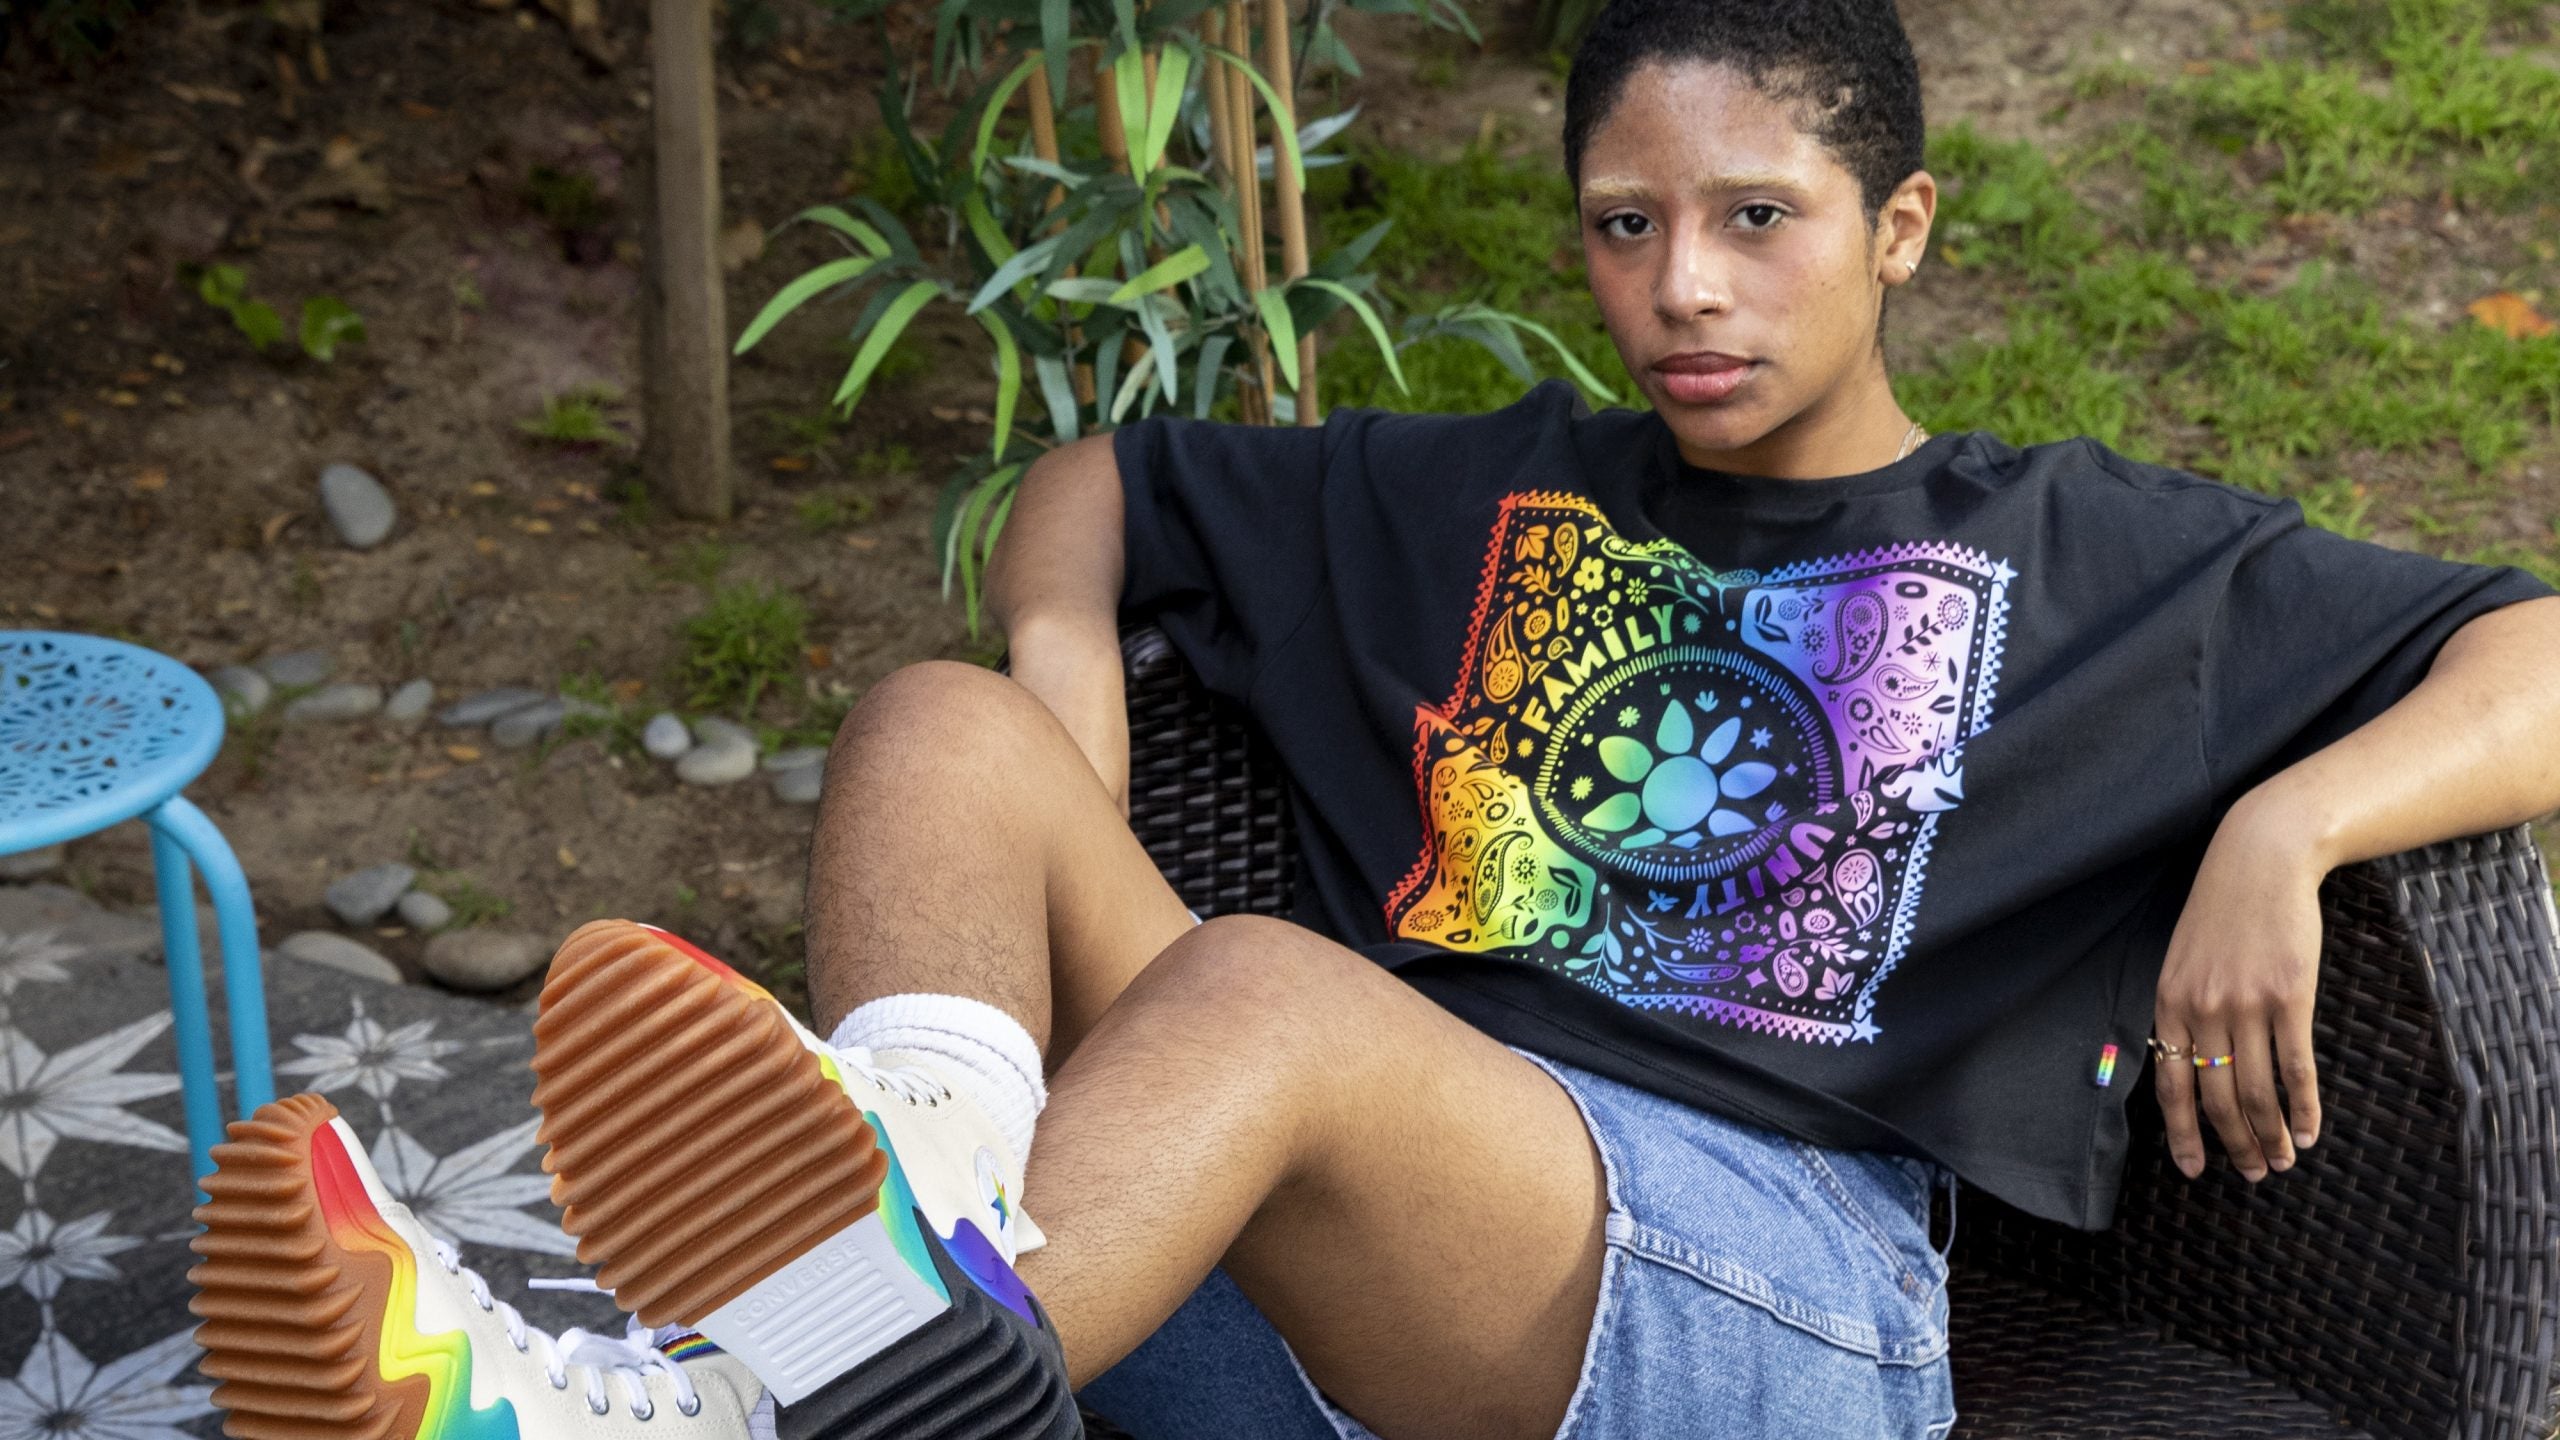 Converse Highlights Intersectionality And The Importance Of Found Families For Pride 2022 Campaign